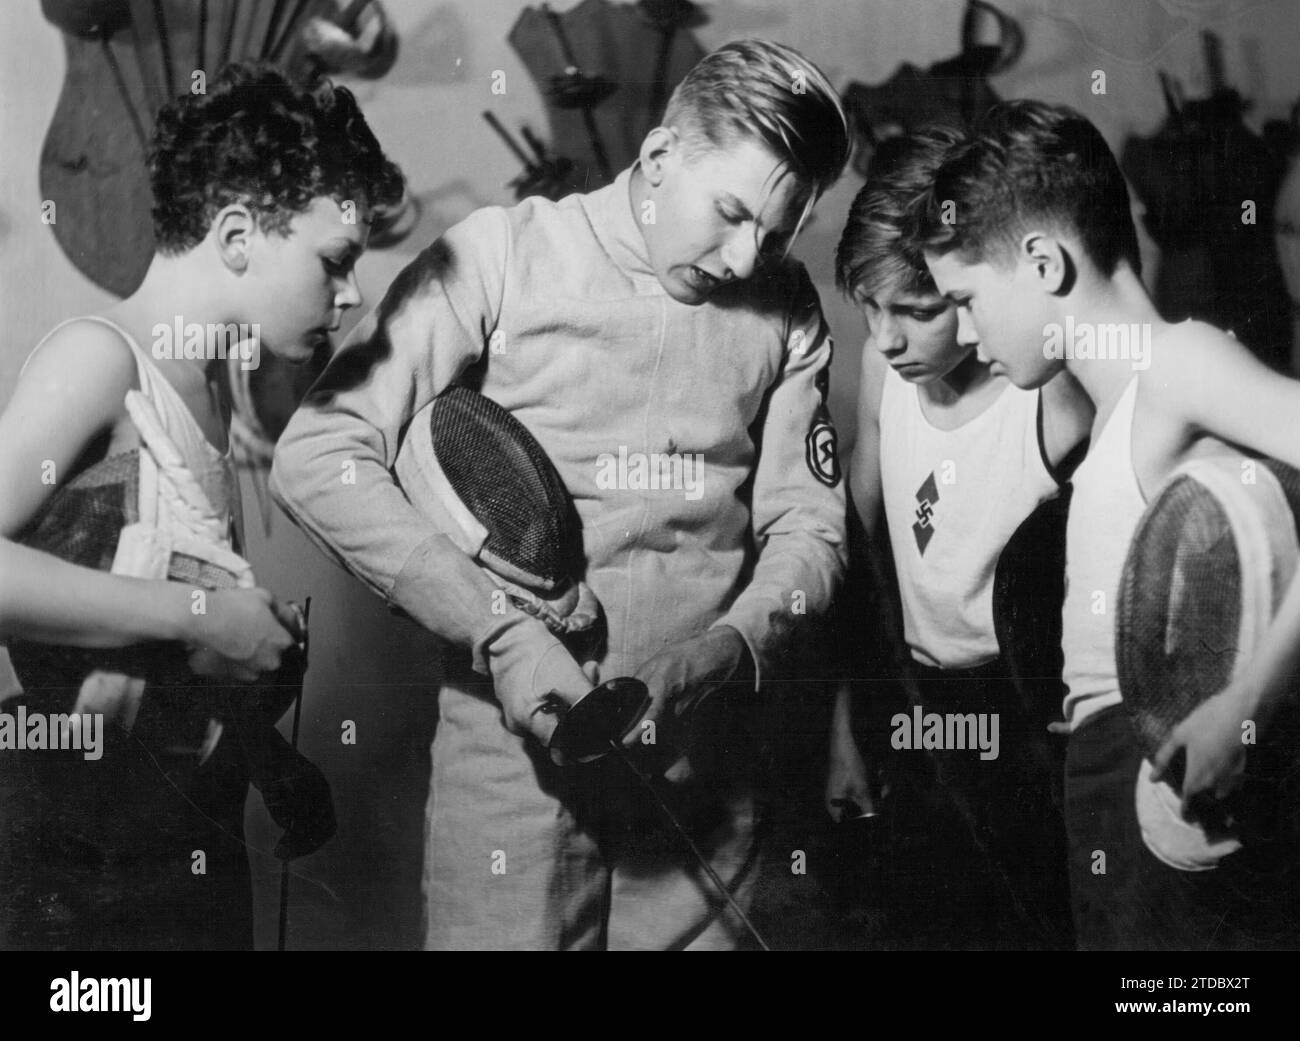 Germany, 1944. An instructor giving explanations to some of his students at a Hitler Youth fencing school. Credit: Album / Archivo ABC Stock Photo